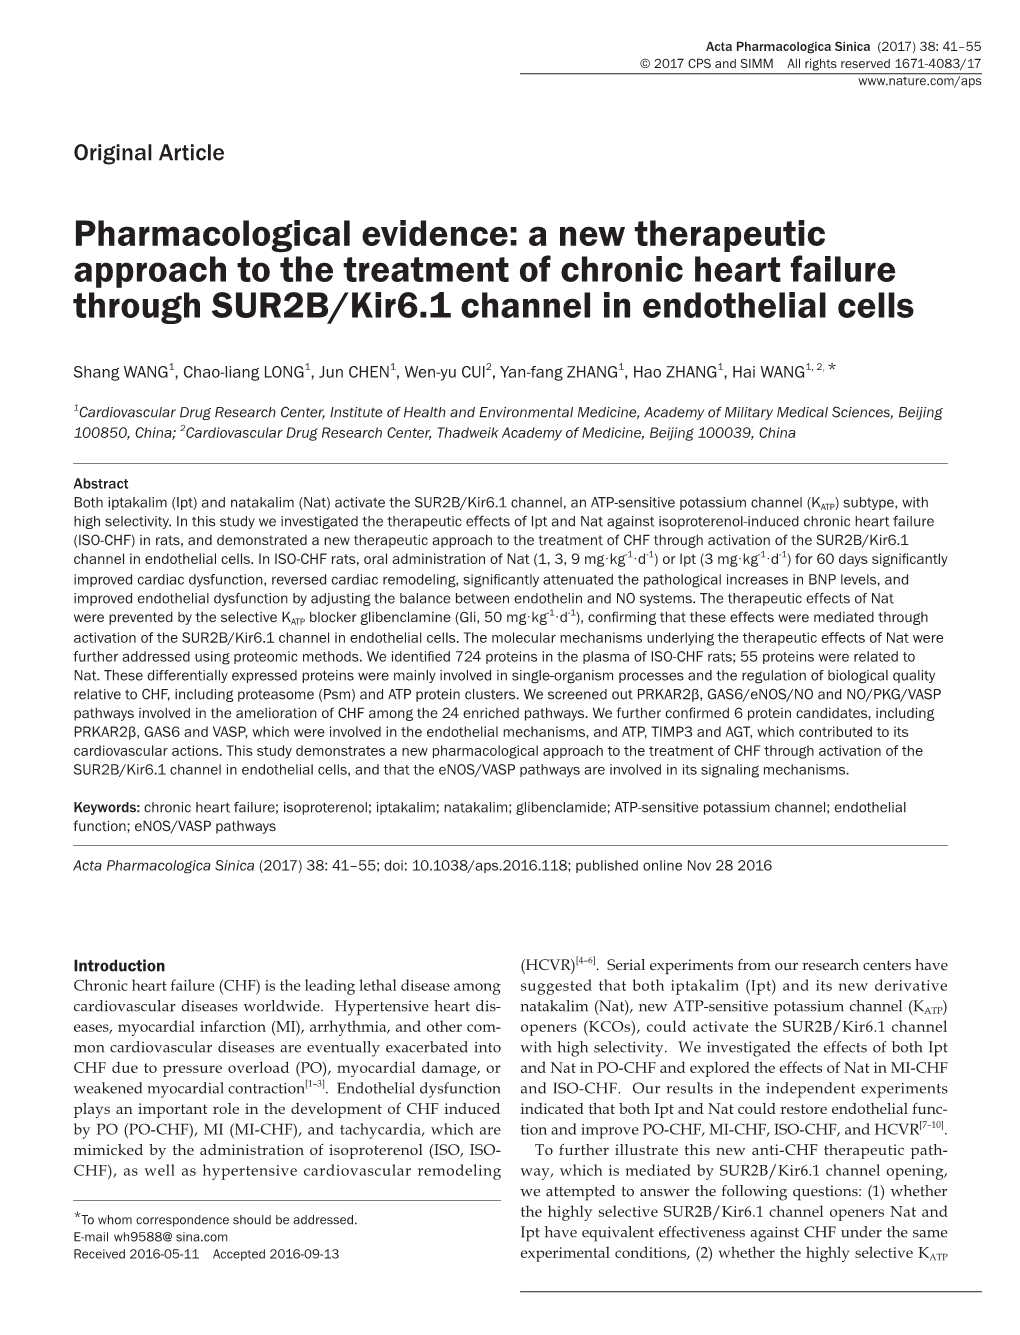 Pharmacological Evidence: a New Therapeutic Approach to the Treatment of Chronic Heart Failure Through SUR2B/Kir6.1 Channel in Endothelial Cells